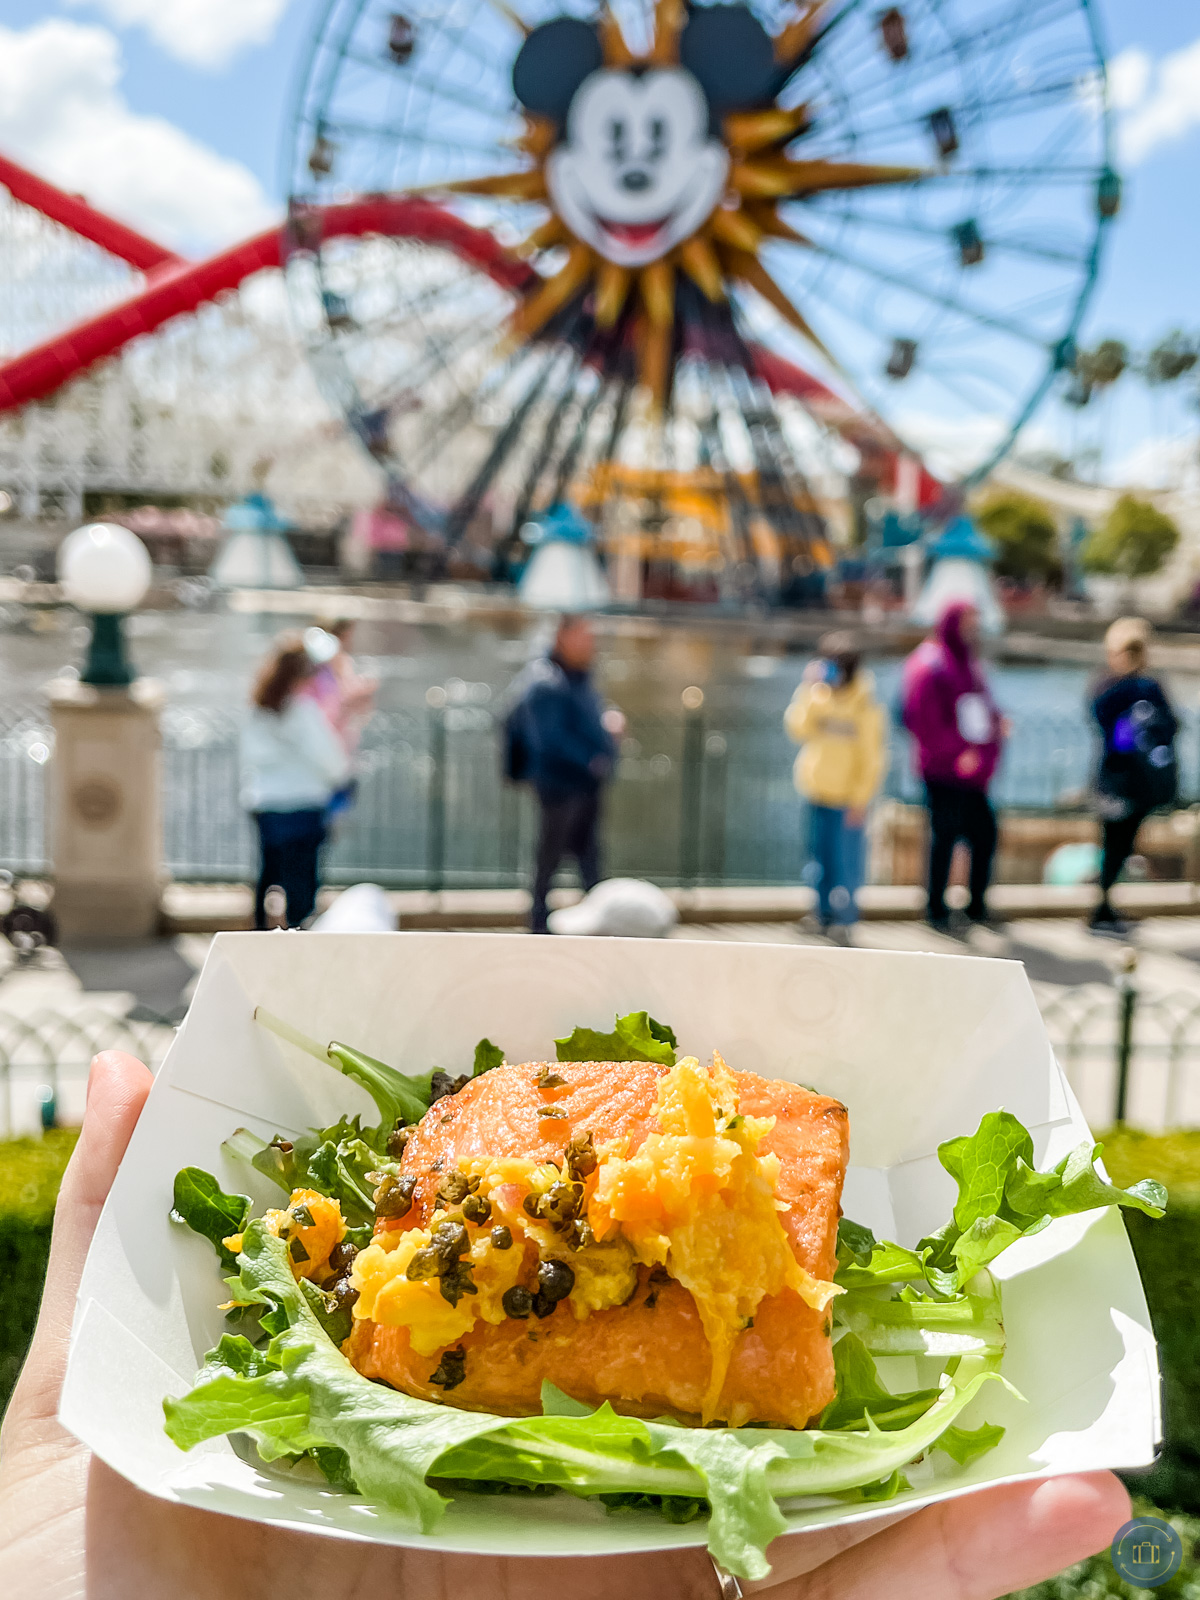 salmon salad at disneyland food and wine festival held in front of mickey wheel